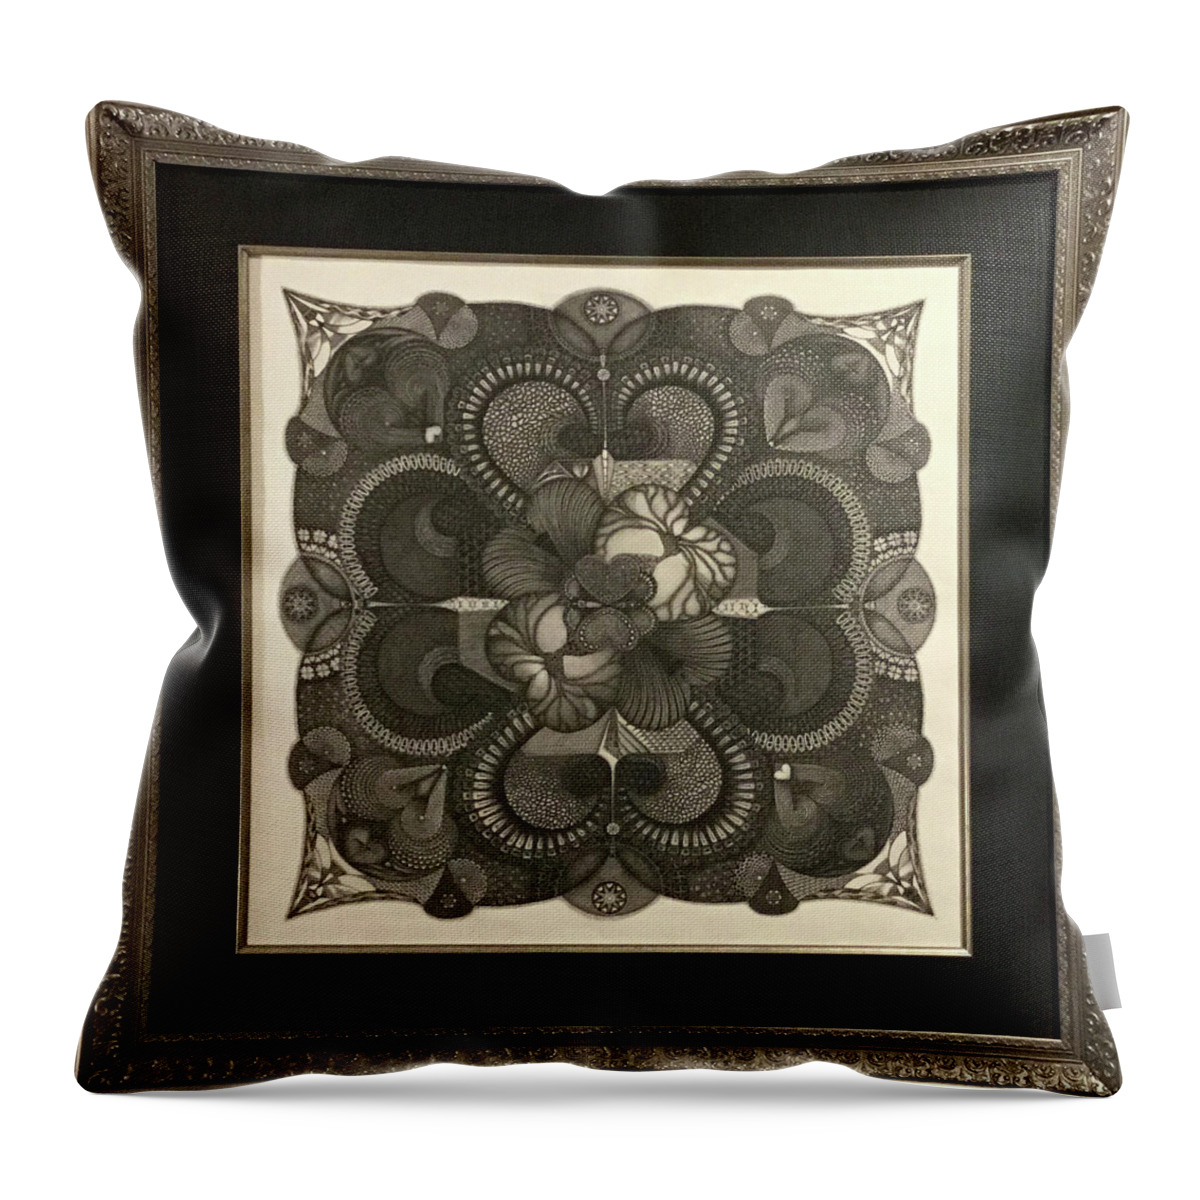  Throw Pillow featuring the drawing Heart To Heart #1 by James Lanigan Thompson MFA